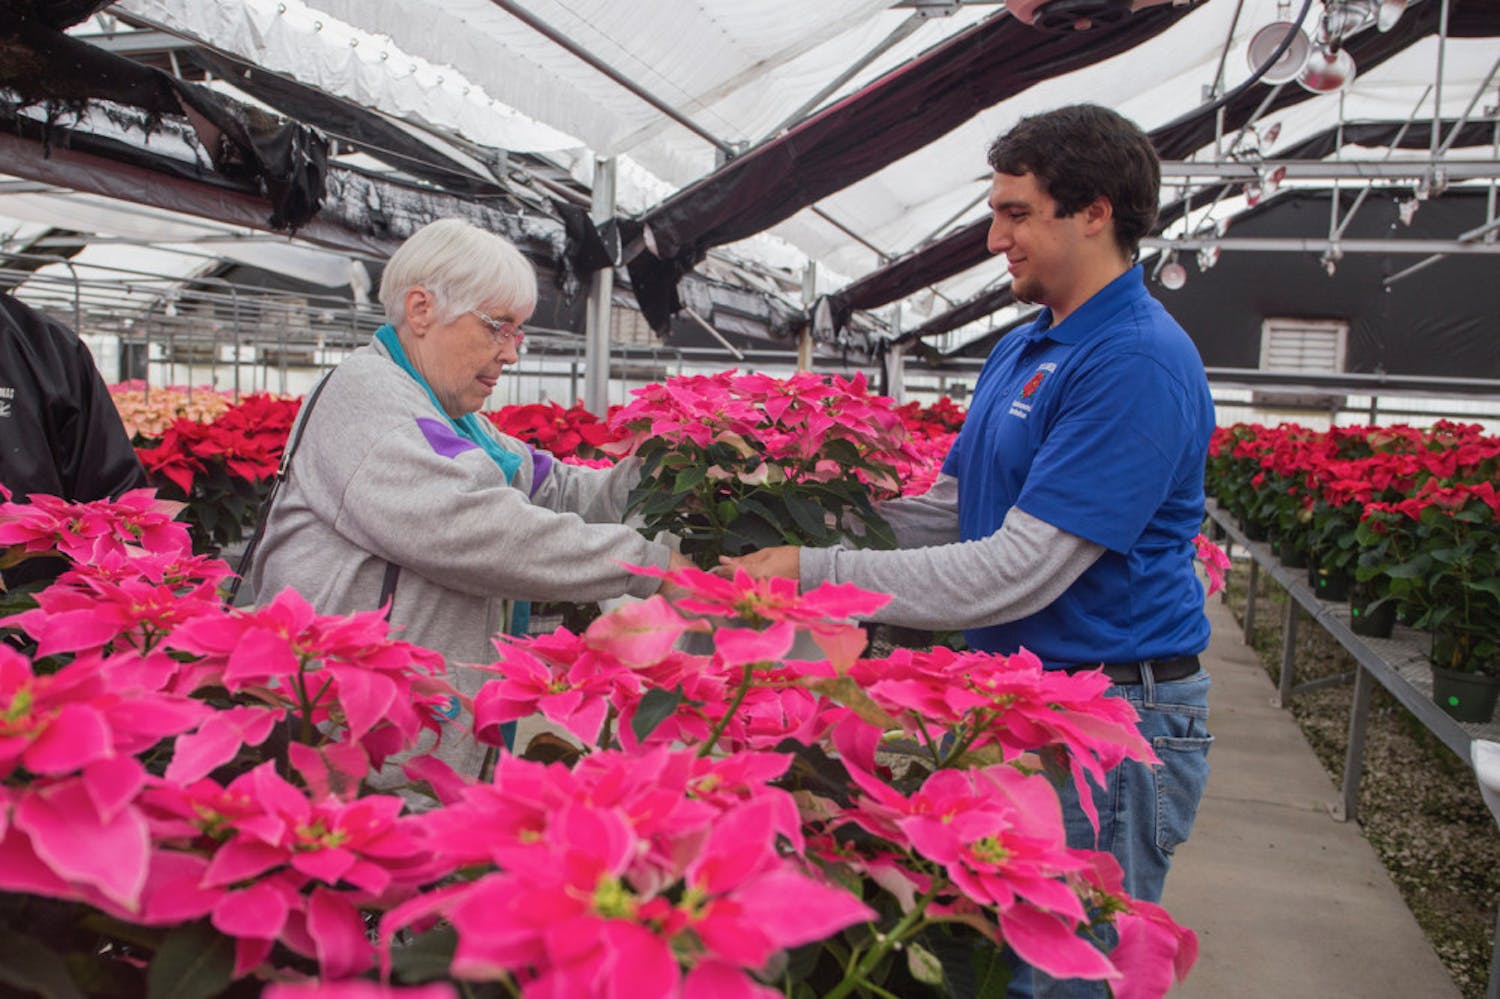 Christian Collazo, the former vice president of the UF Environmental and Horticulture Club, hands out plants in the club’s annual poinsettia sale last year. In its 22nd year, more than 5,000 plants with 150 types of poinsettias will be sold. 